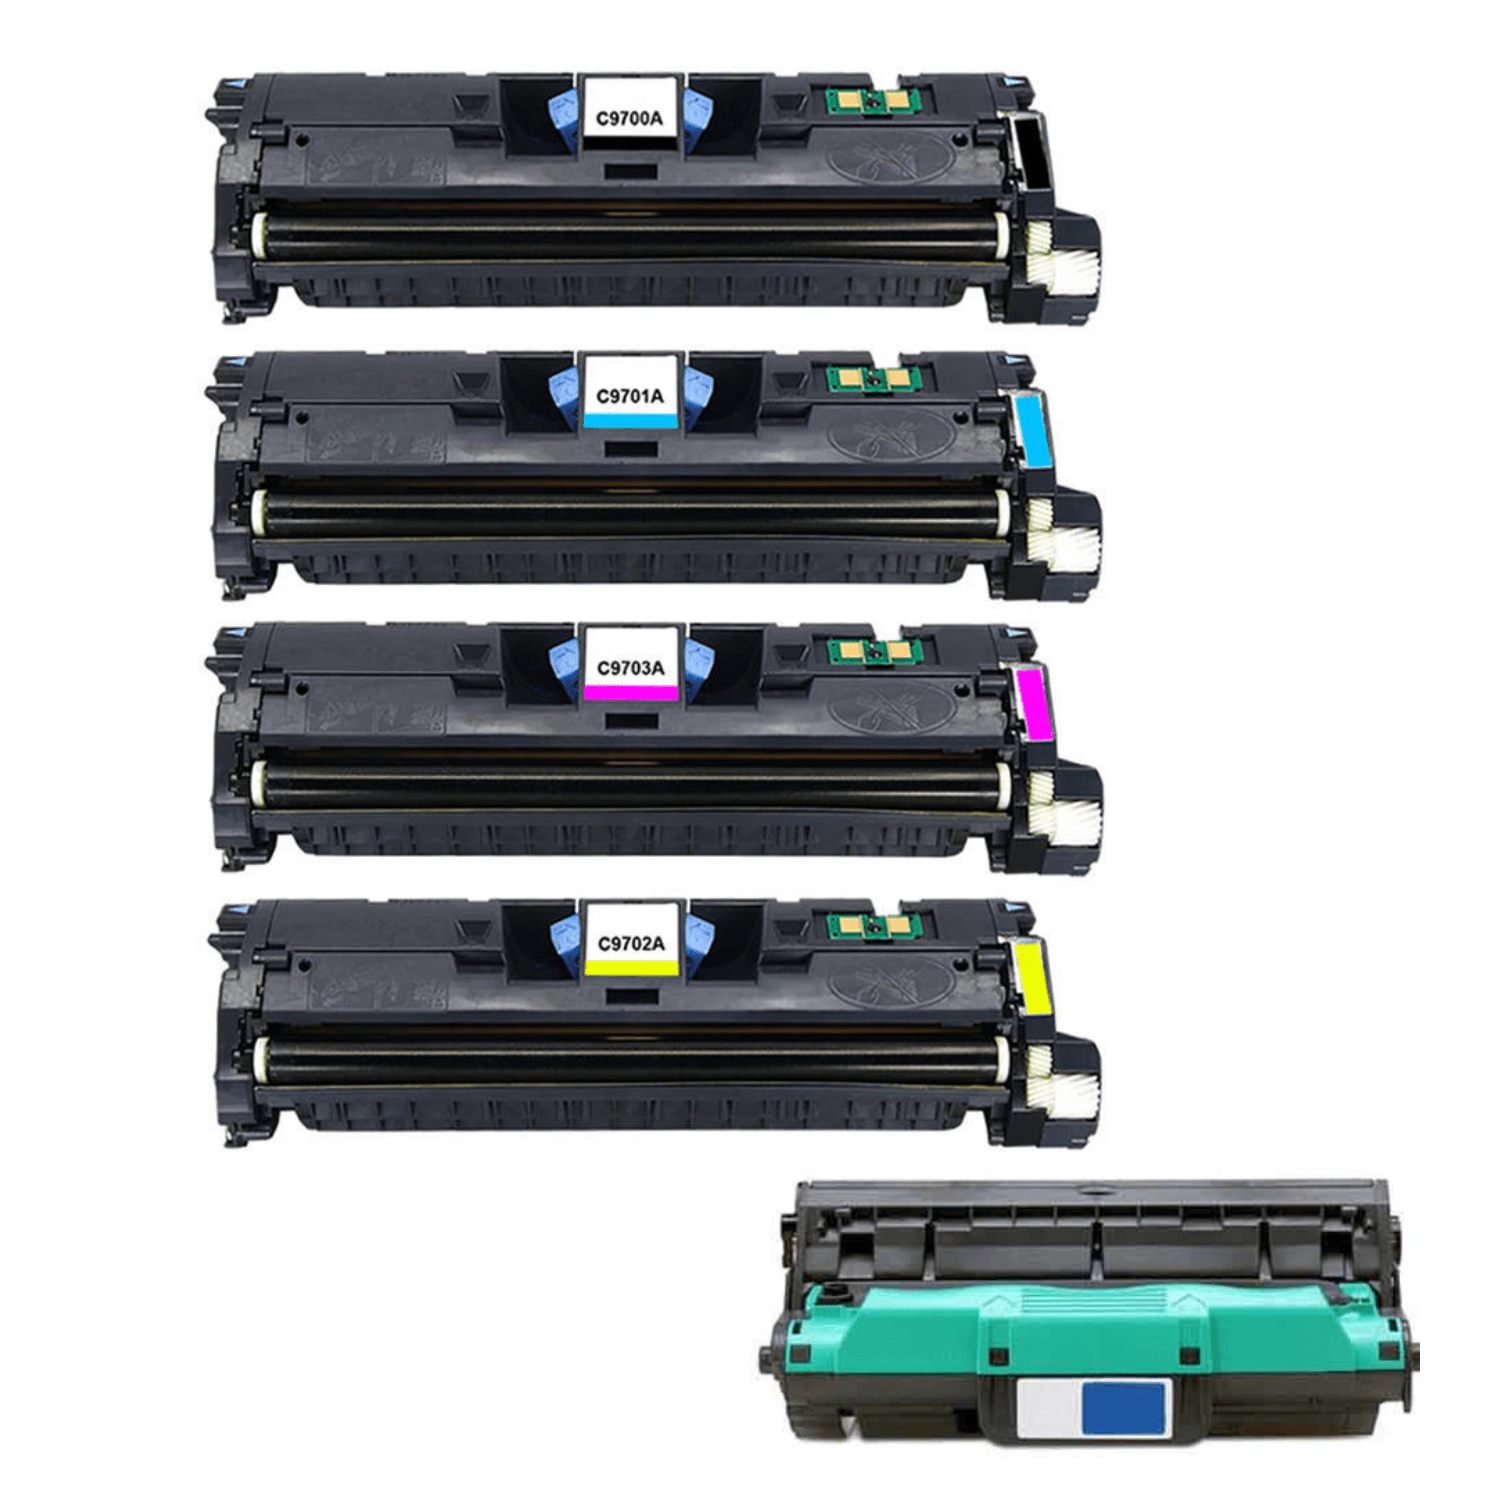 Absolute Toner AbsoluteToner Drum and Laser Toner Cartridge Compatible With HP 121A Combo of 5 (Black Cyan Magenta Yellow & 1 Drum Unit) HP Toner Cartridges